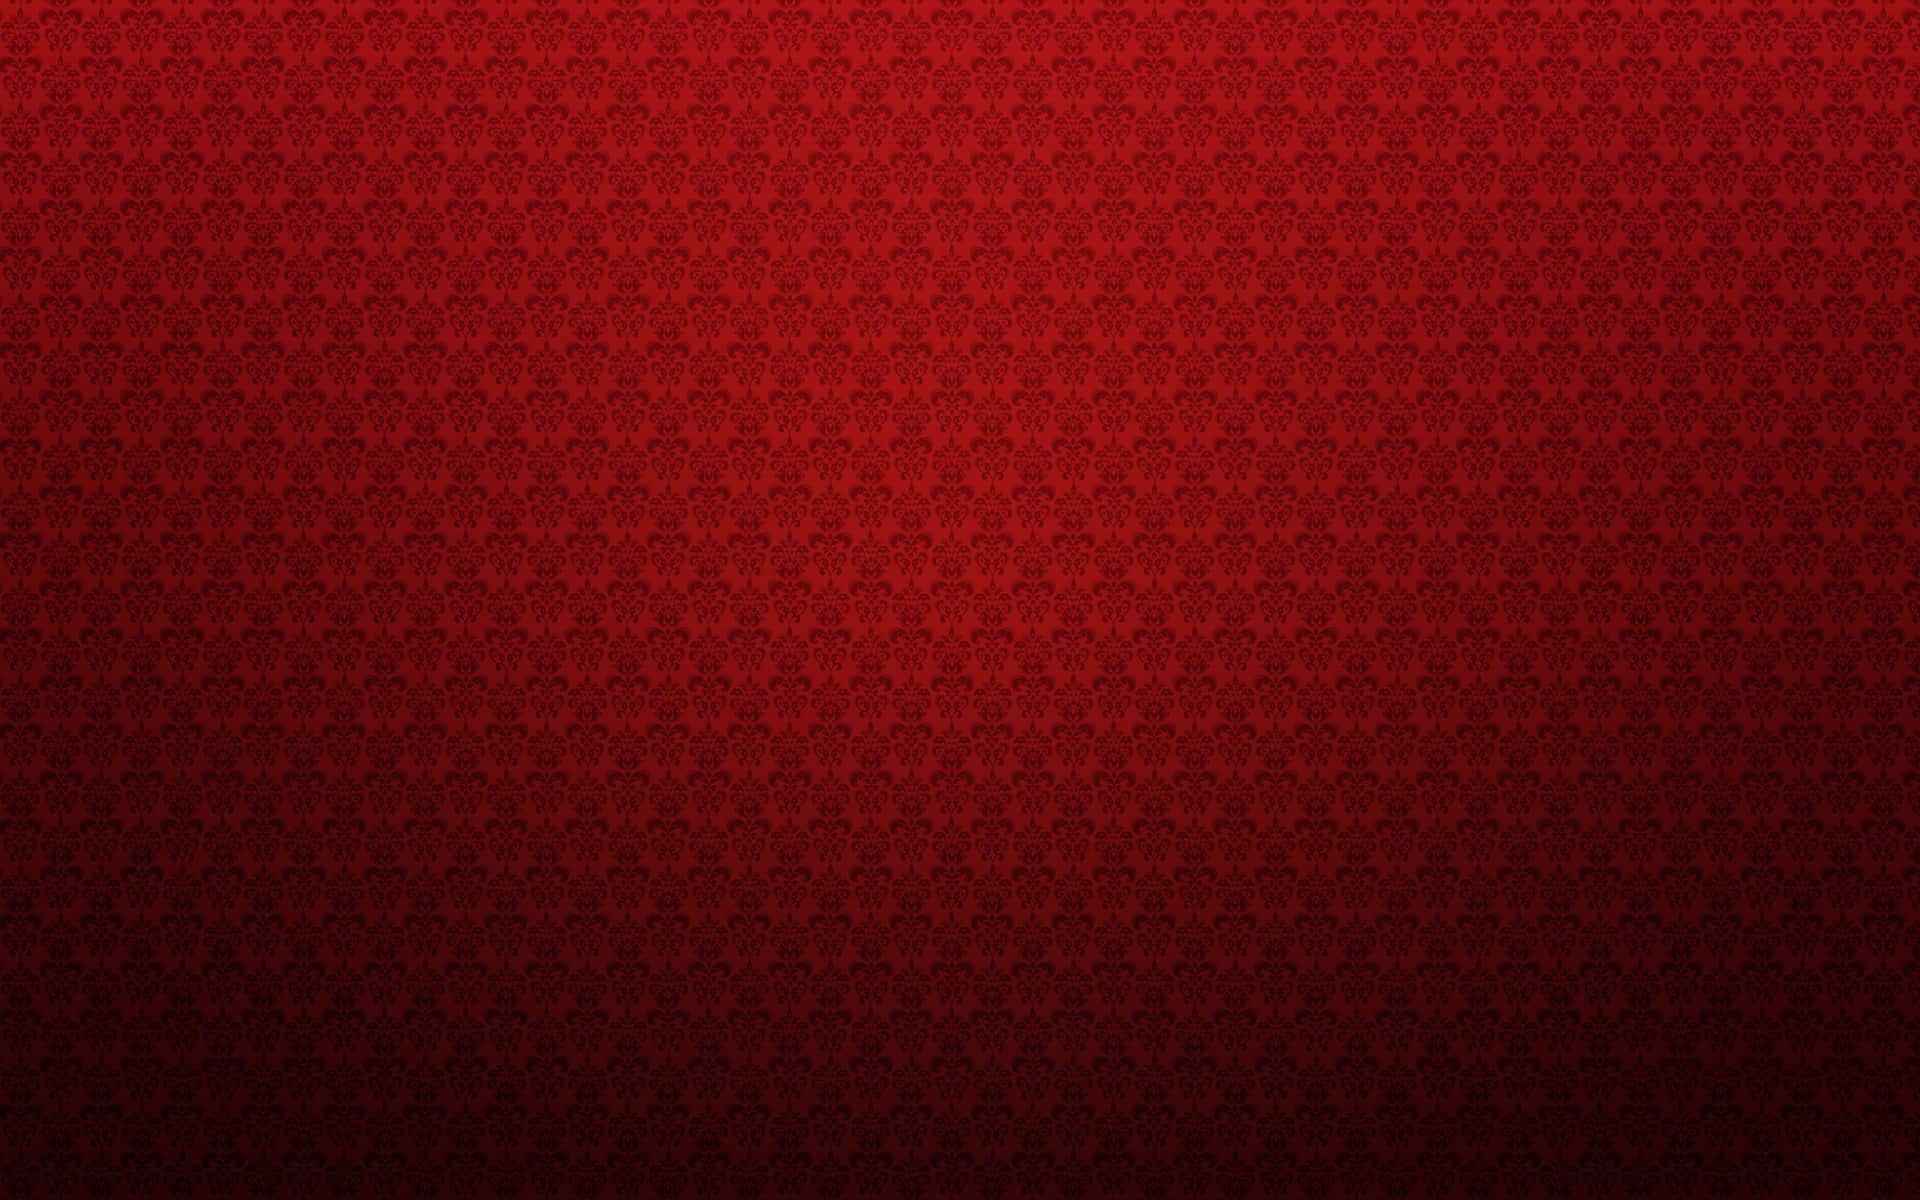 red wallpaper with a pattern of small circles